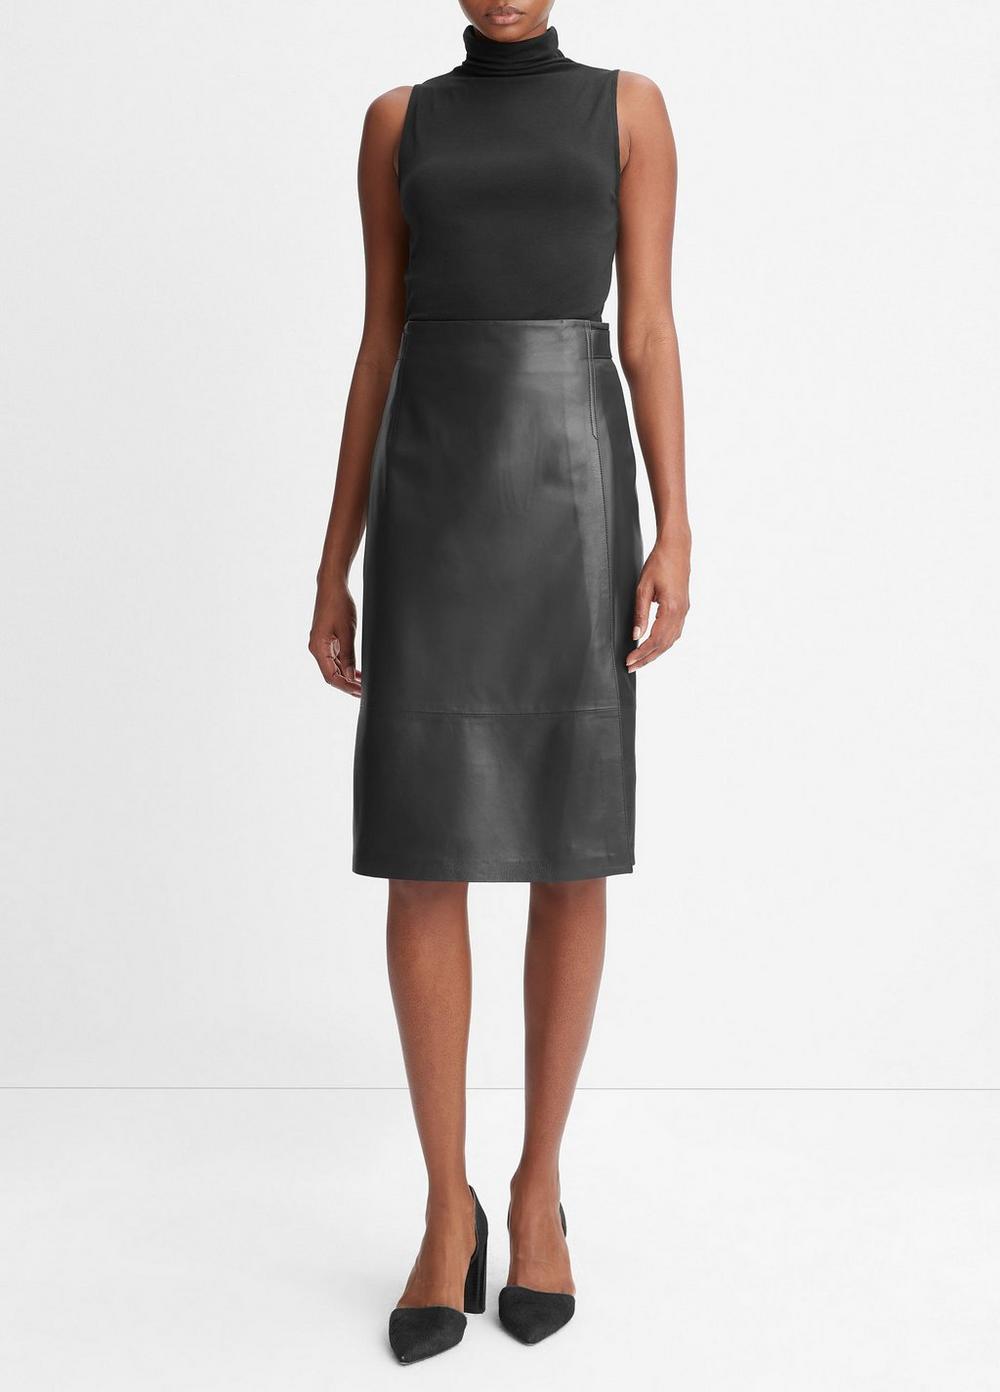 Tailored Leather Skirt, Black, Size 6 Vince